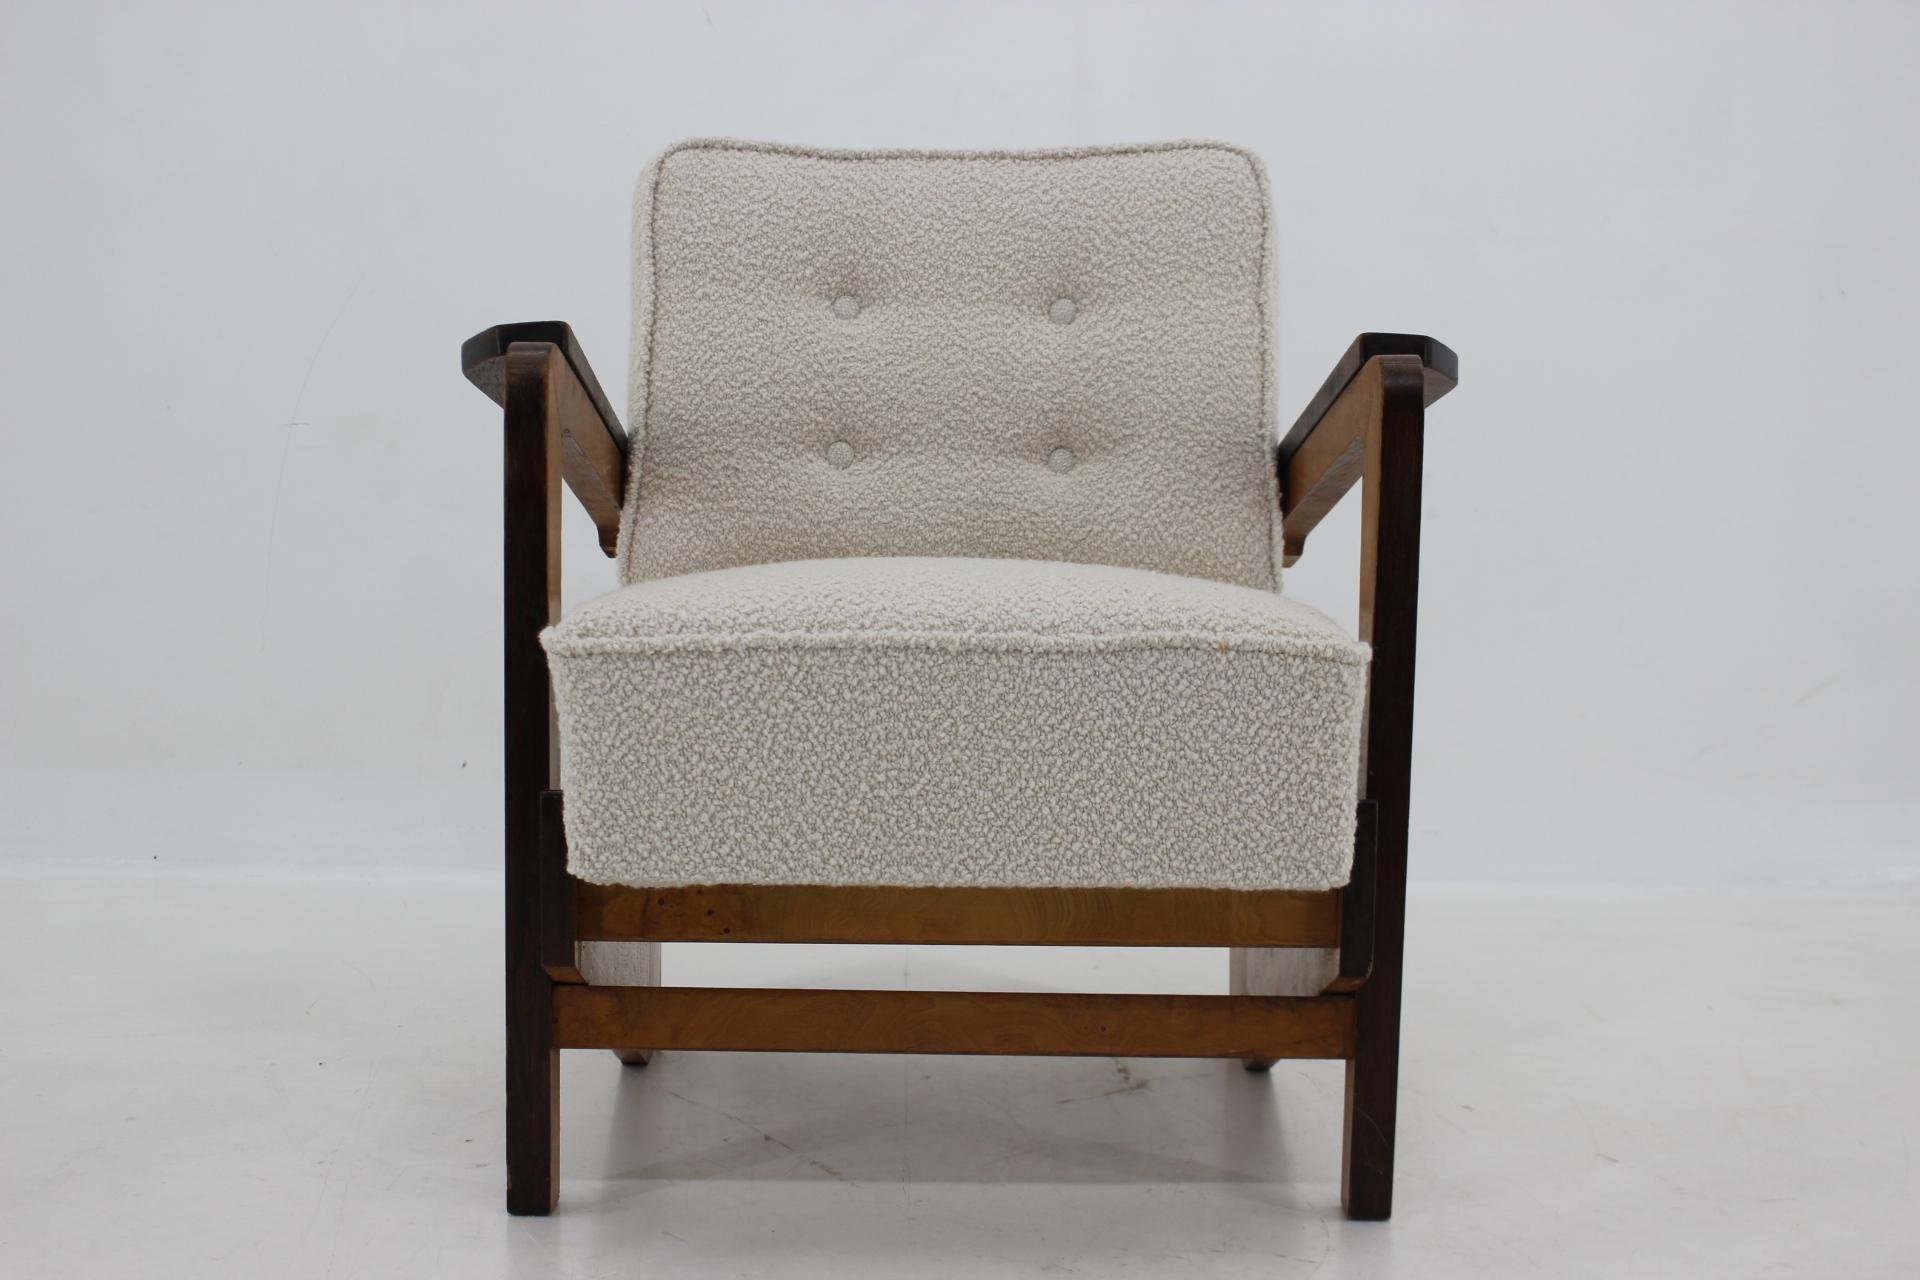 - Newly upholstered in cream Wool Boucle Fabric from ZINC 
- Wooden parts have been re-polished 
- Height of seat 44 cm.